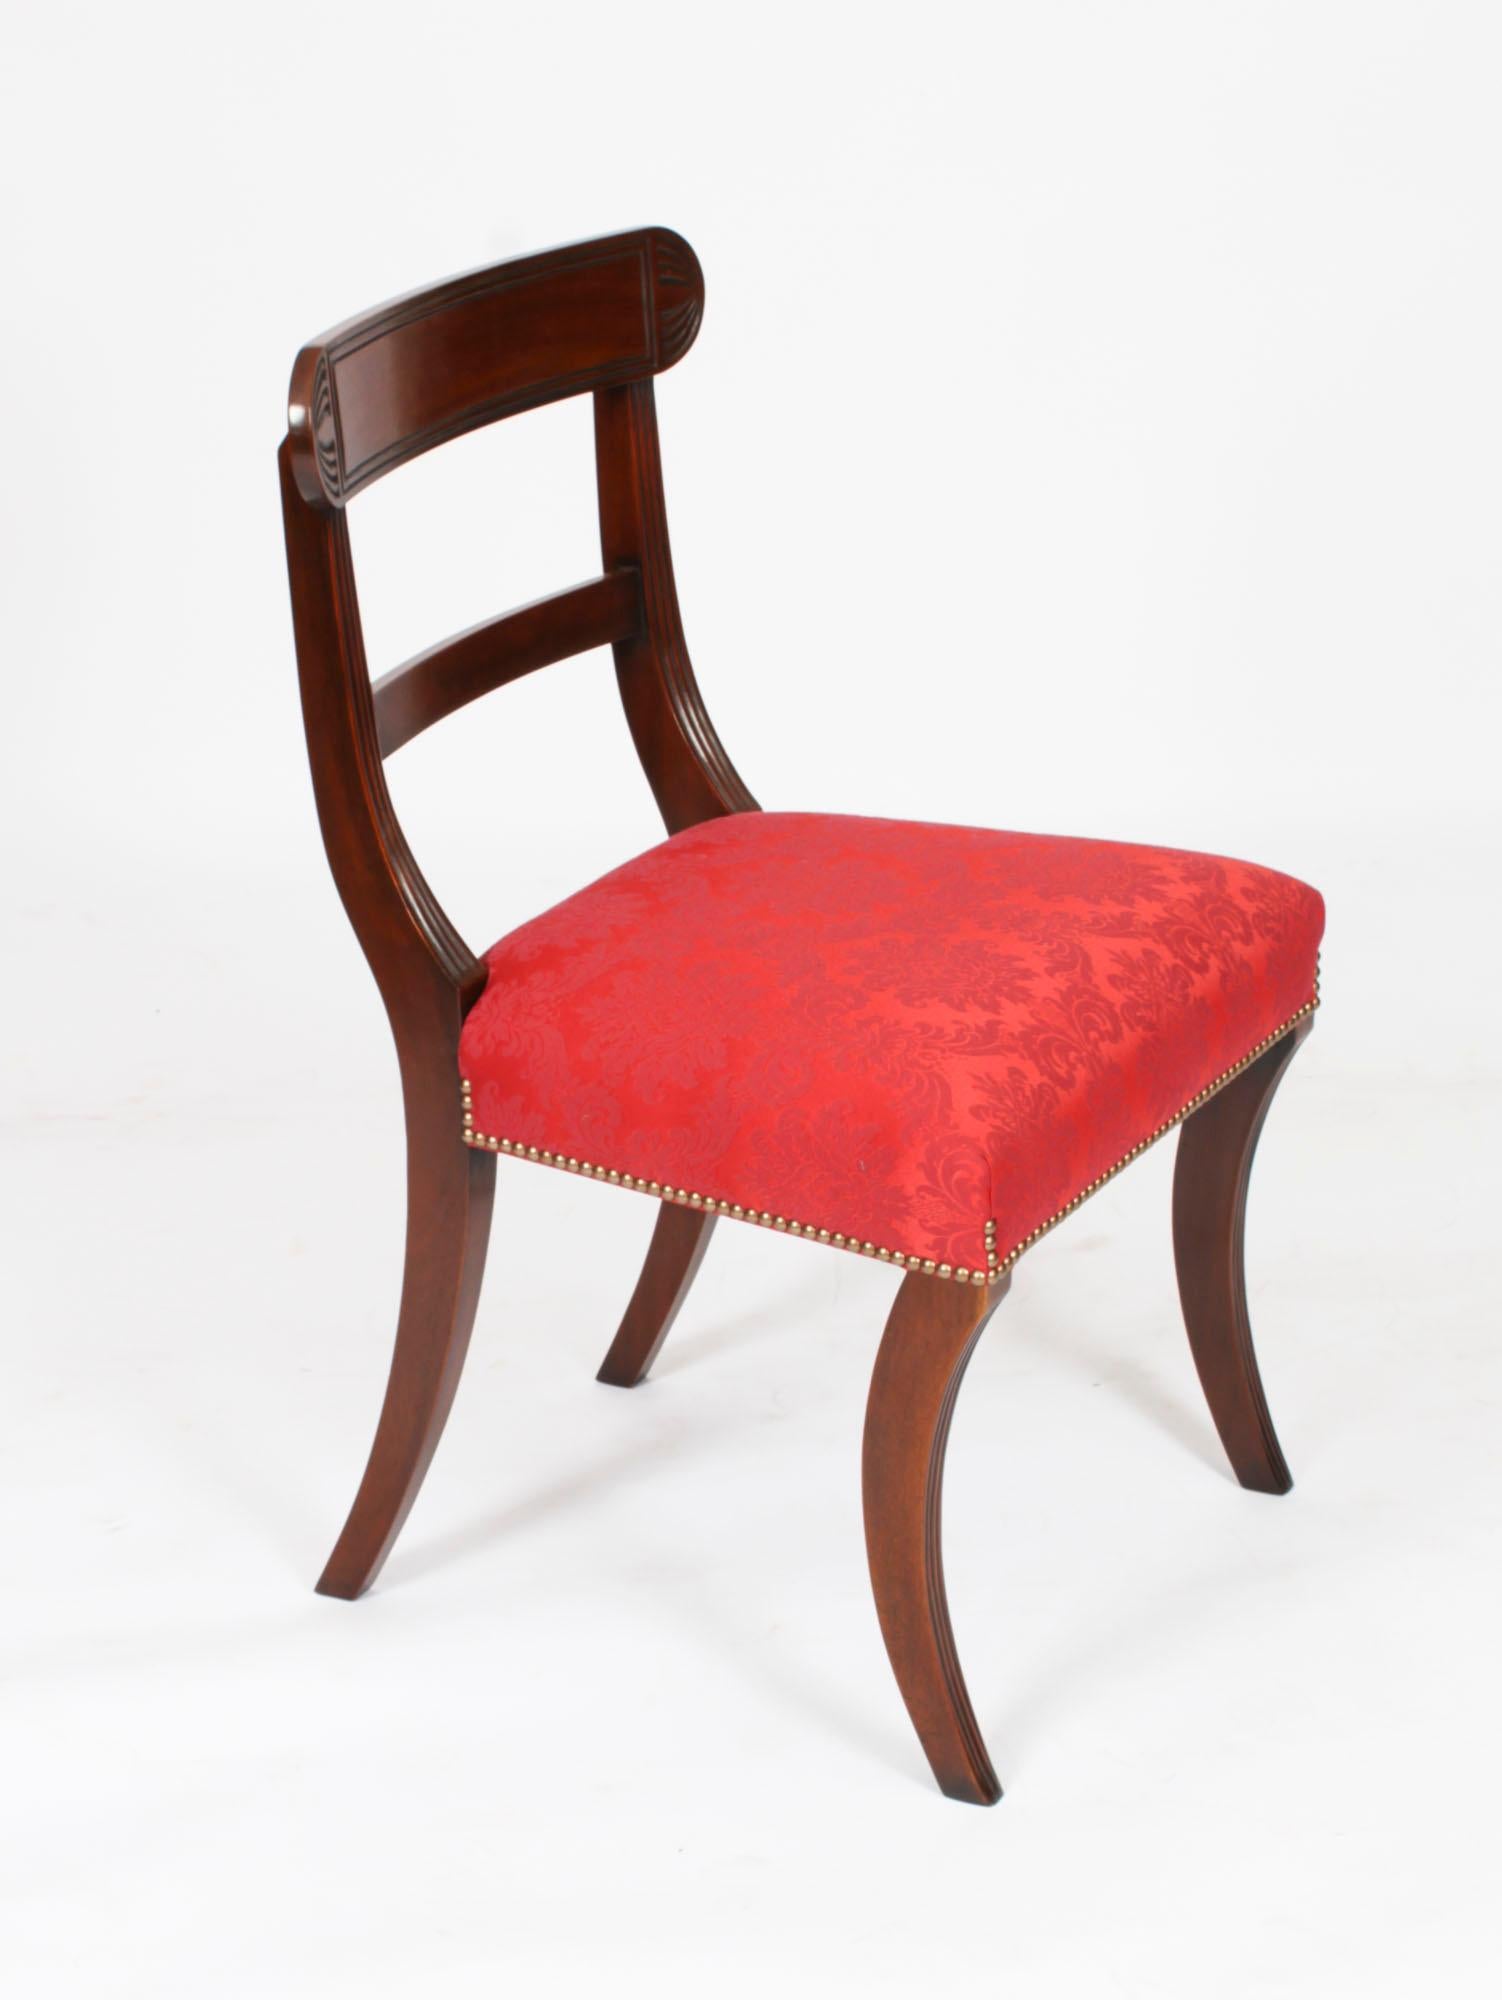 An absolutely fantastic Vintage set of twelve Regency Revival bar bak dining chairs dating from the late 20th century.

These chairs have been masterfully crafted in beautiful solid flame mahogany throughout and the finish and attention to detail